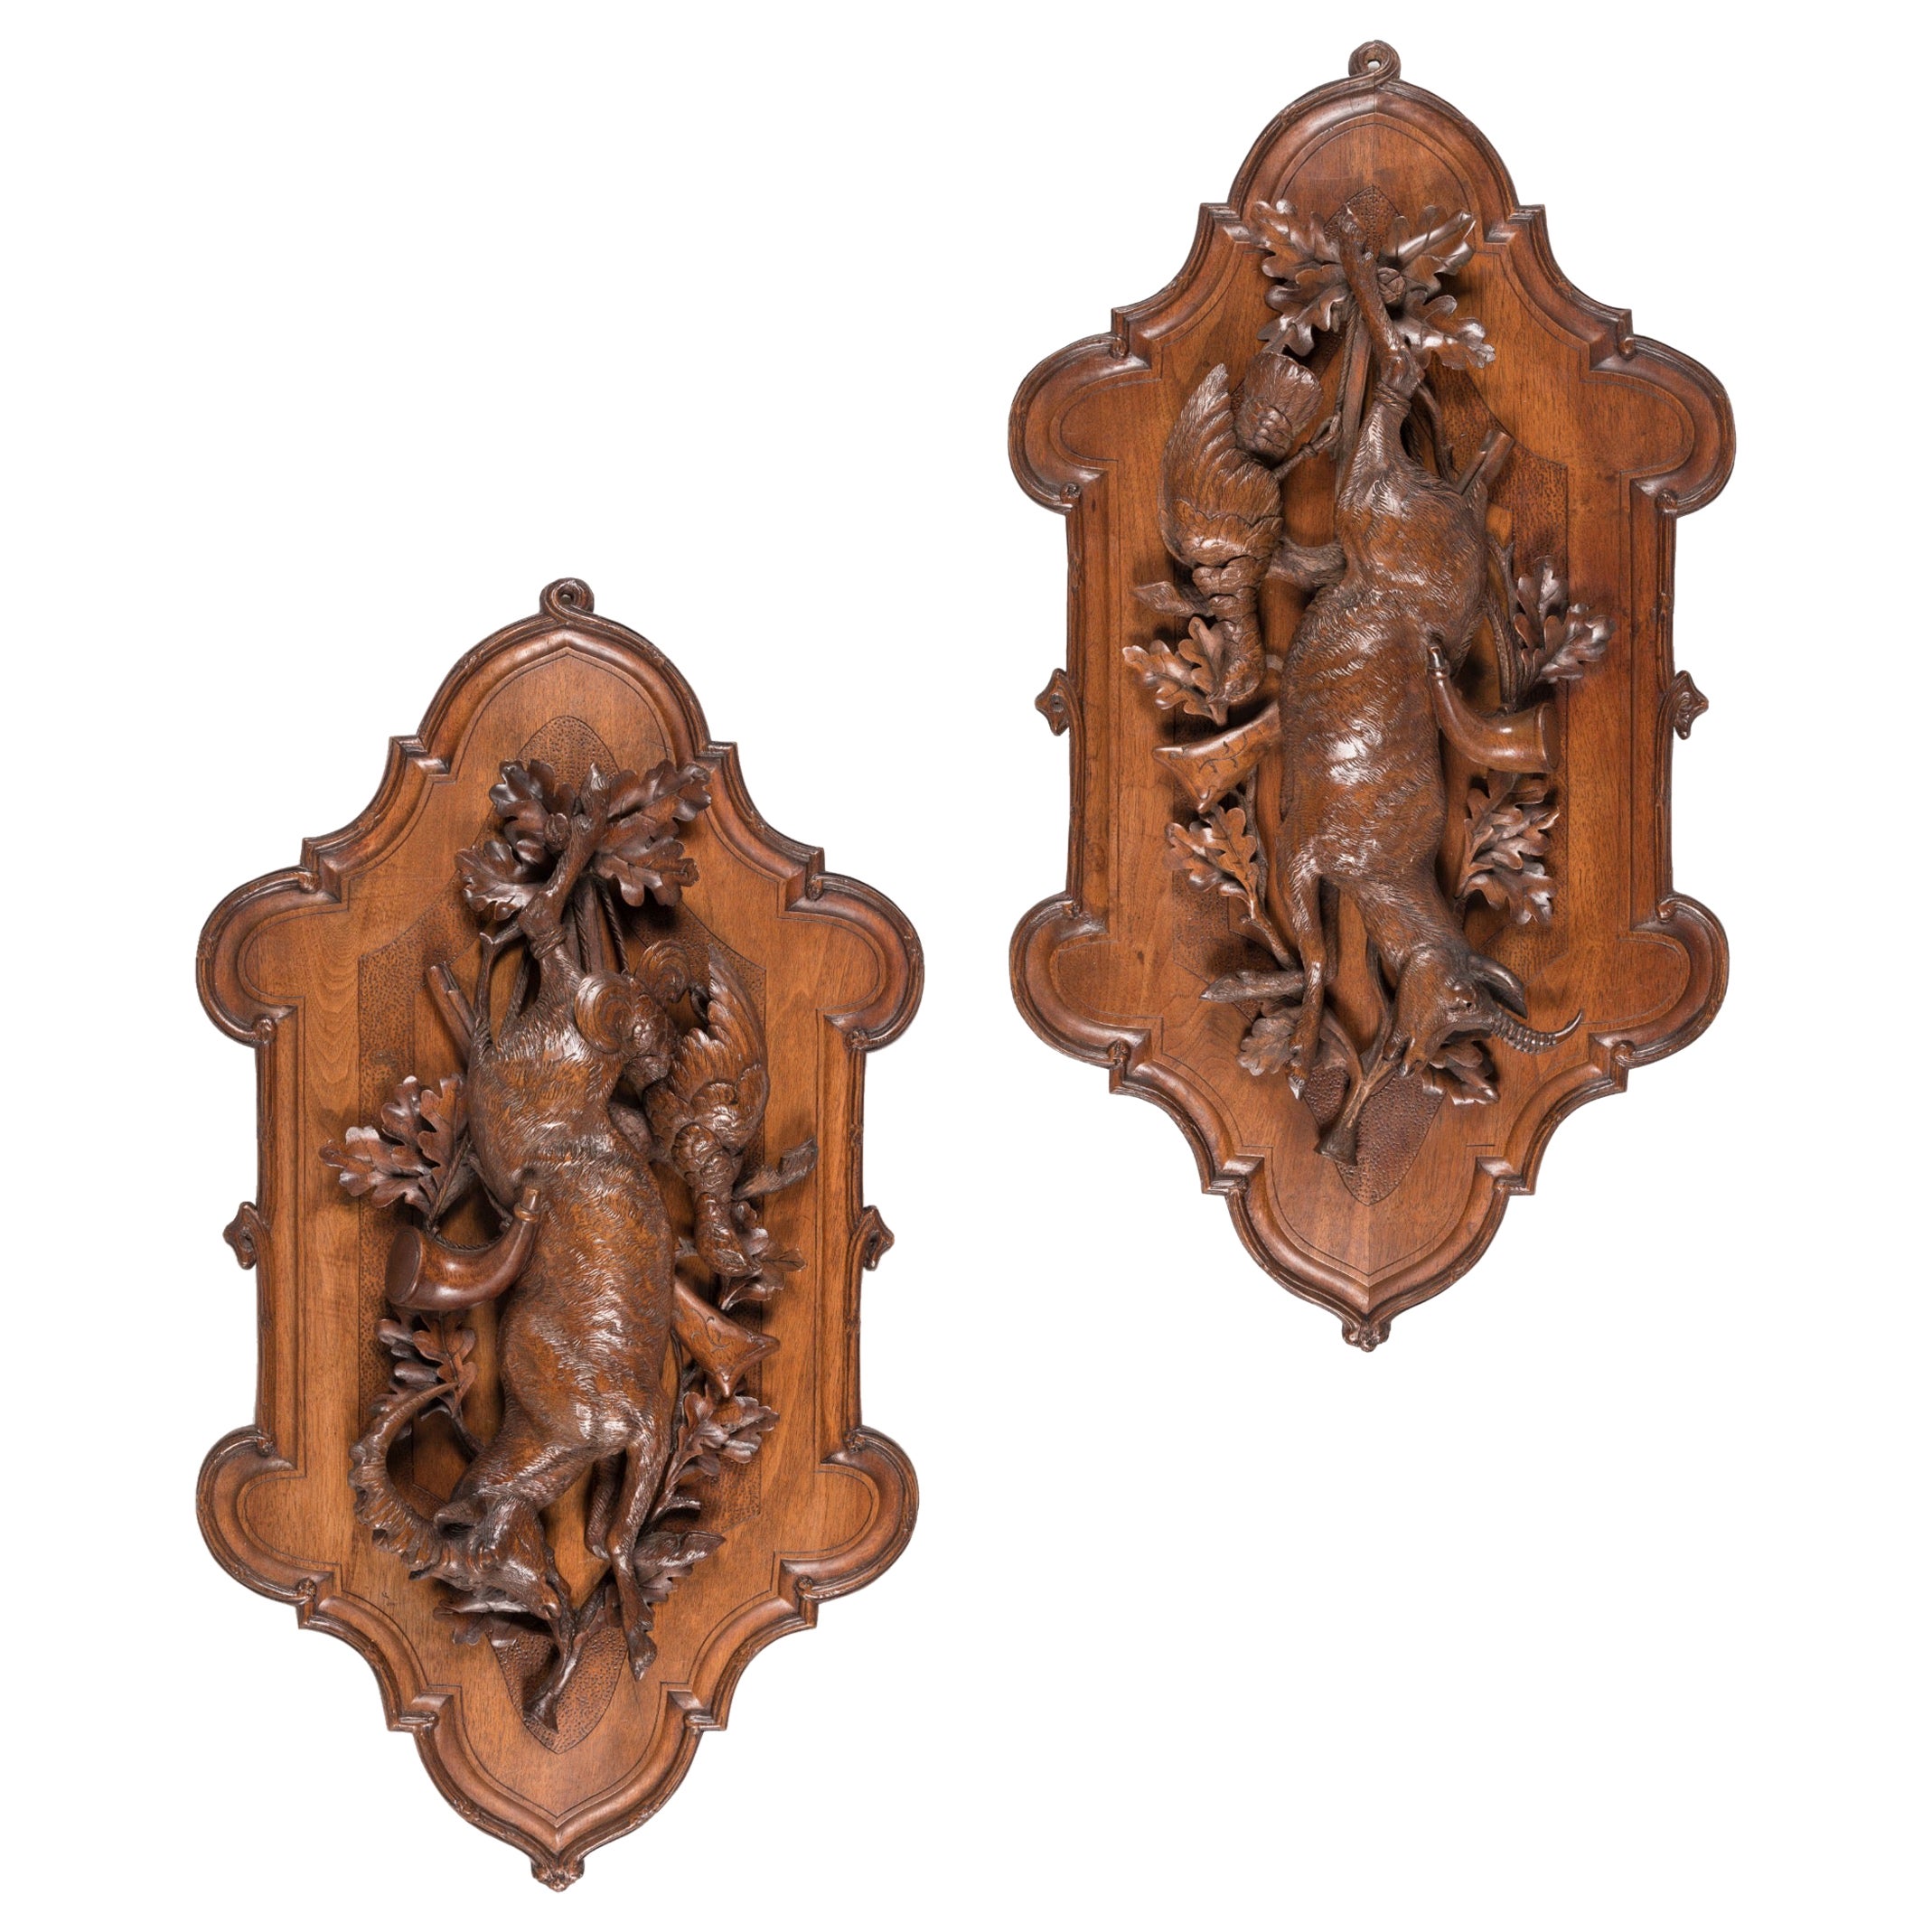 Pair of 19th Century Swiss 'Black Forest' Trophy Hunting Plaques